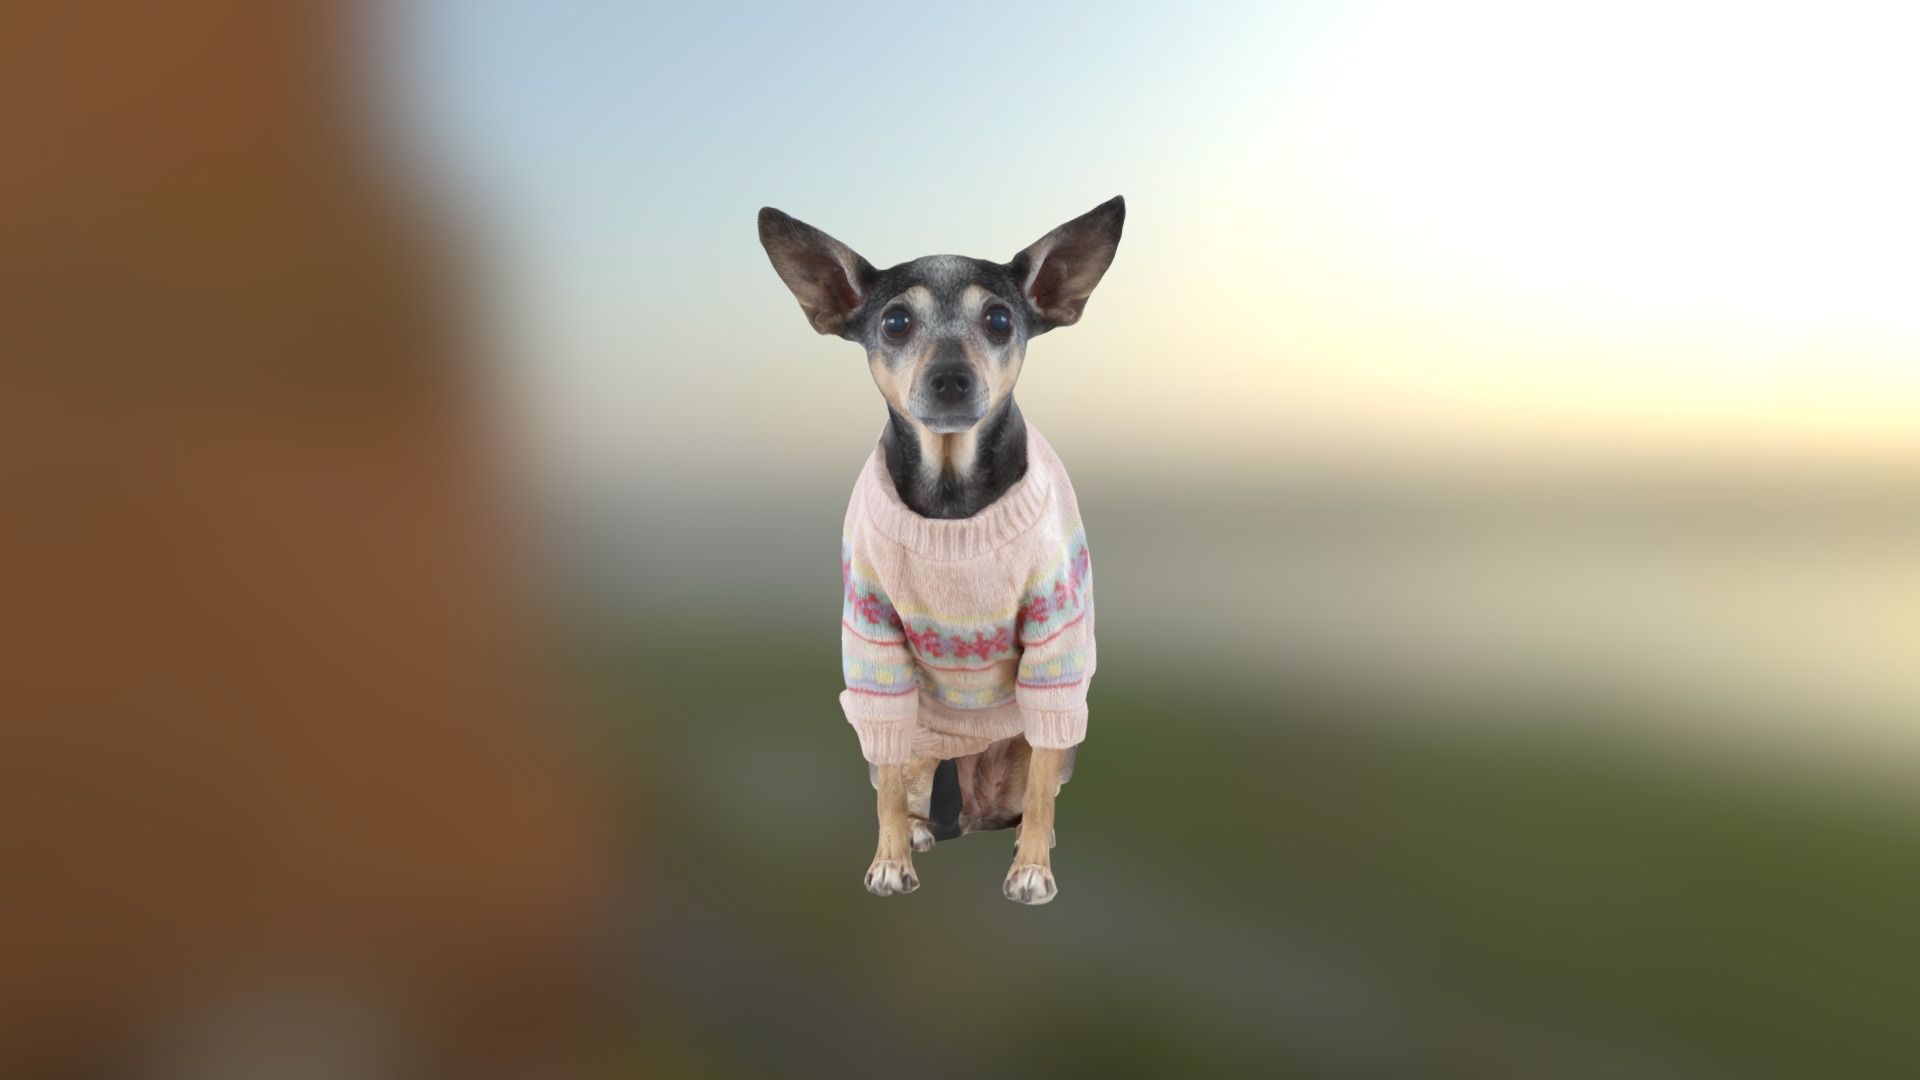 3D model Handsome Dog - This is a 3D model of the Handsome Dog. The 3D model is about a dog wearing a sweater.